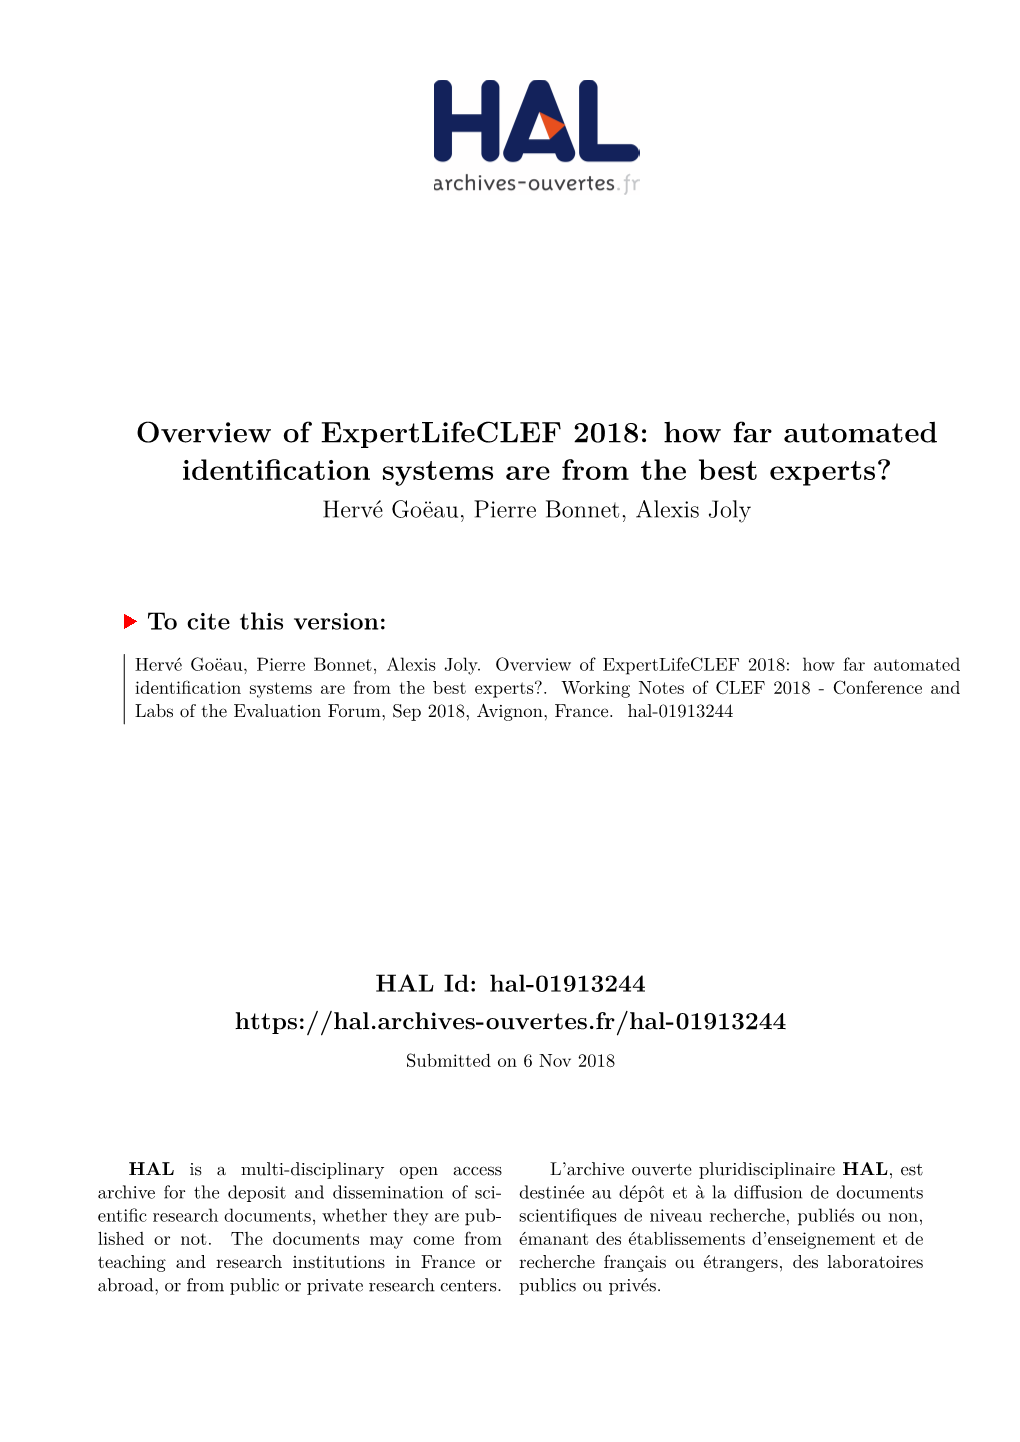 How Far Automated Identification Systems Are from the Best Experts? Hervé Goëau, Pierre Bonnet, Alexis Joly